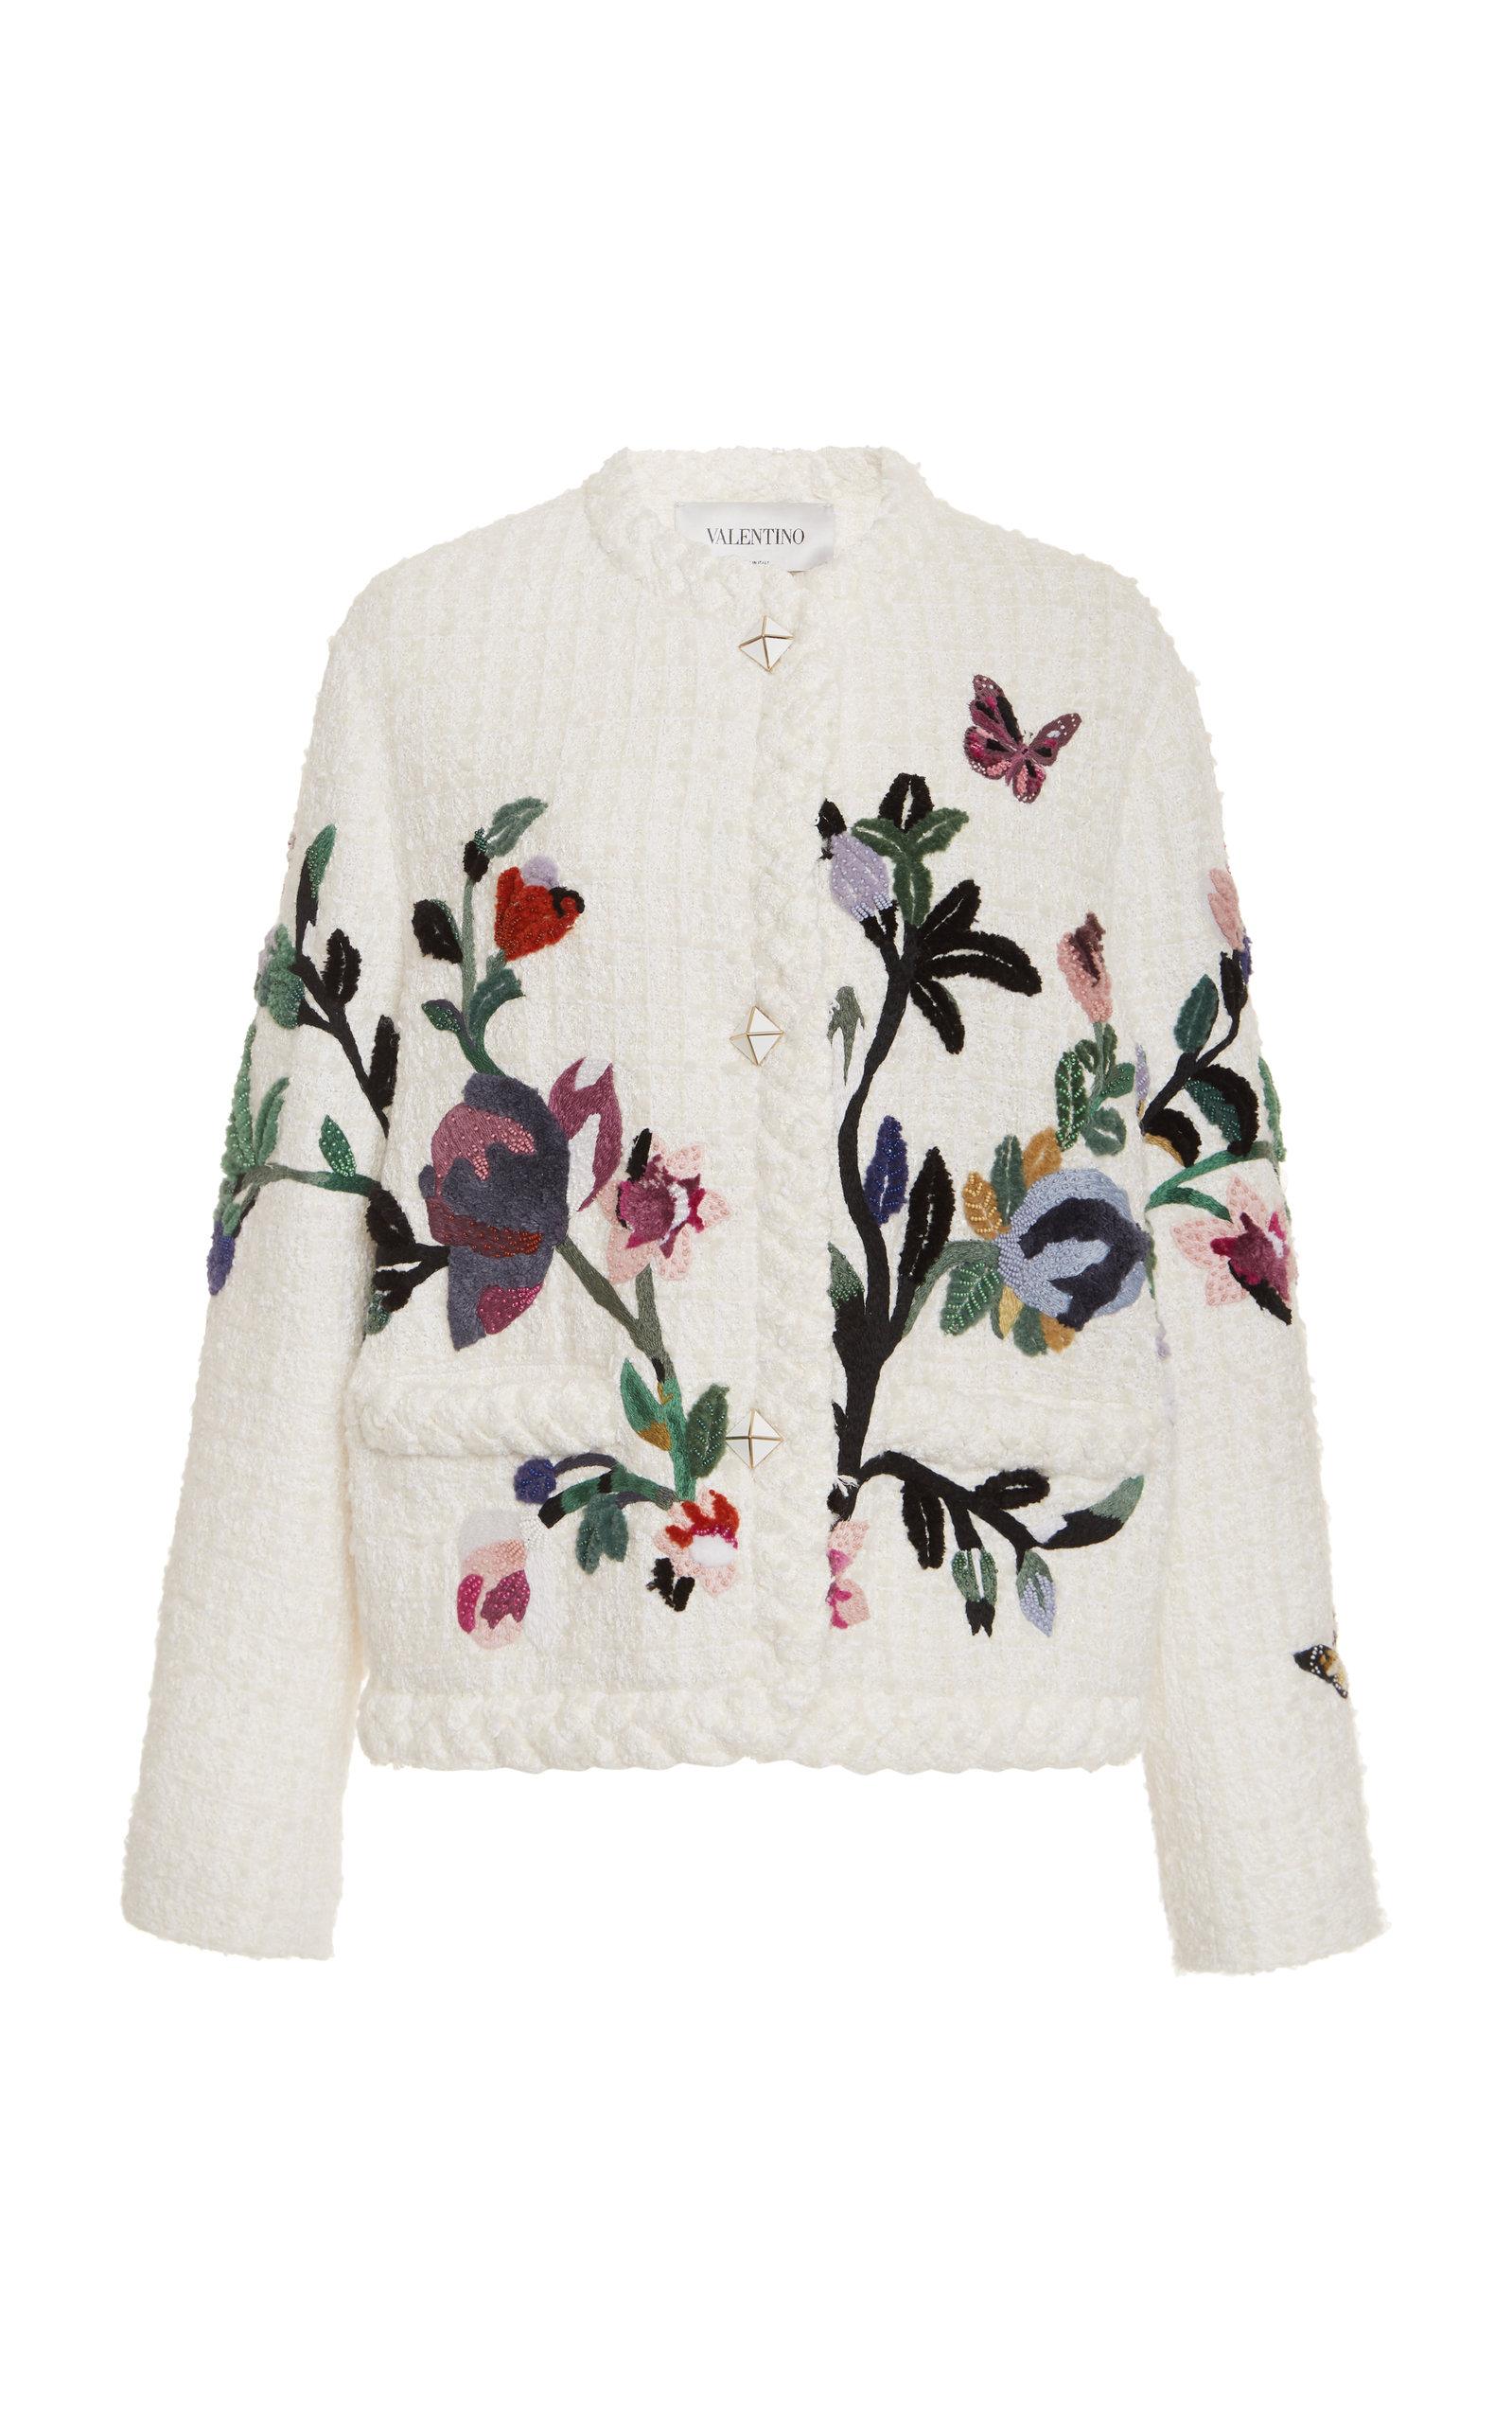 Valentino Embroidered Tweed Jacket in White